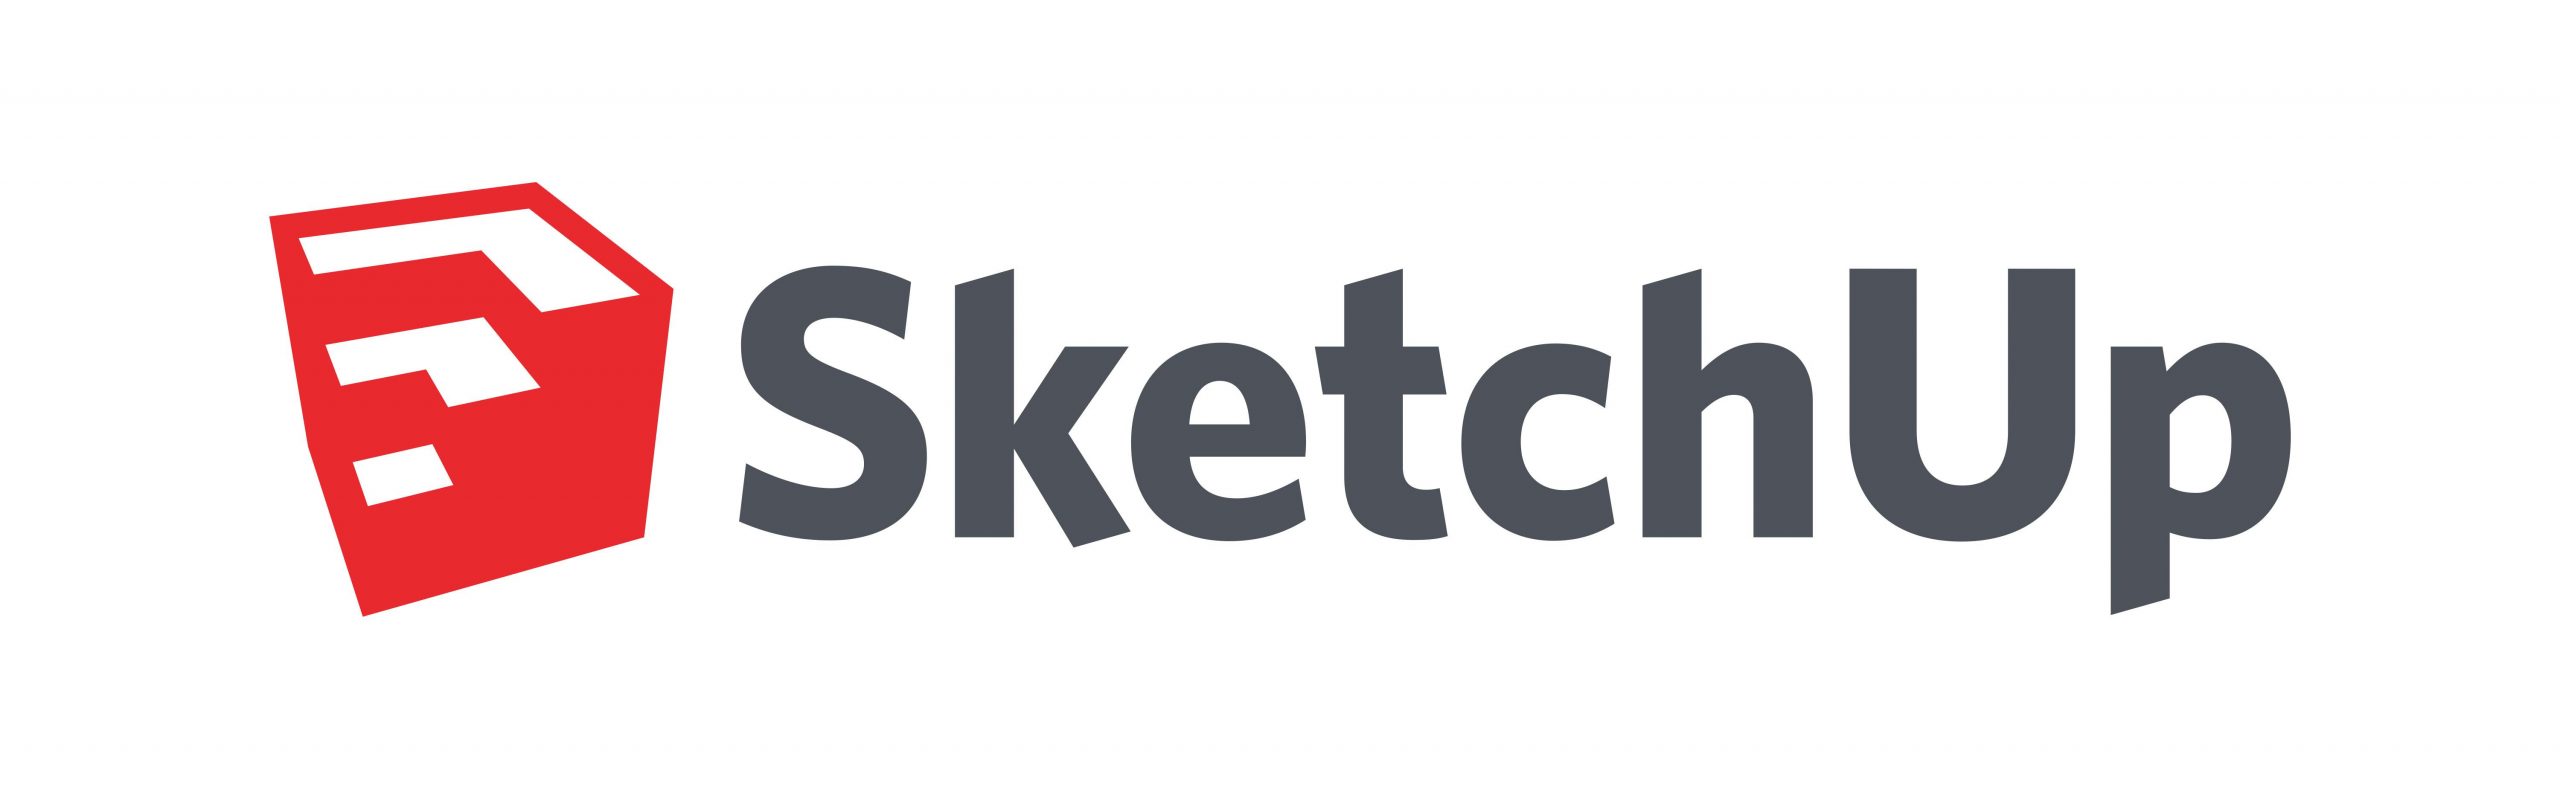 Introduction To SketchUp Free